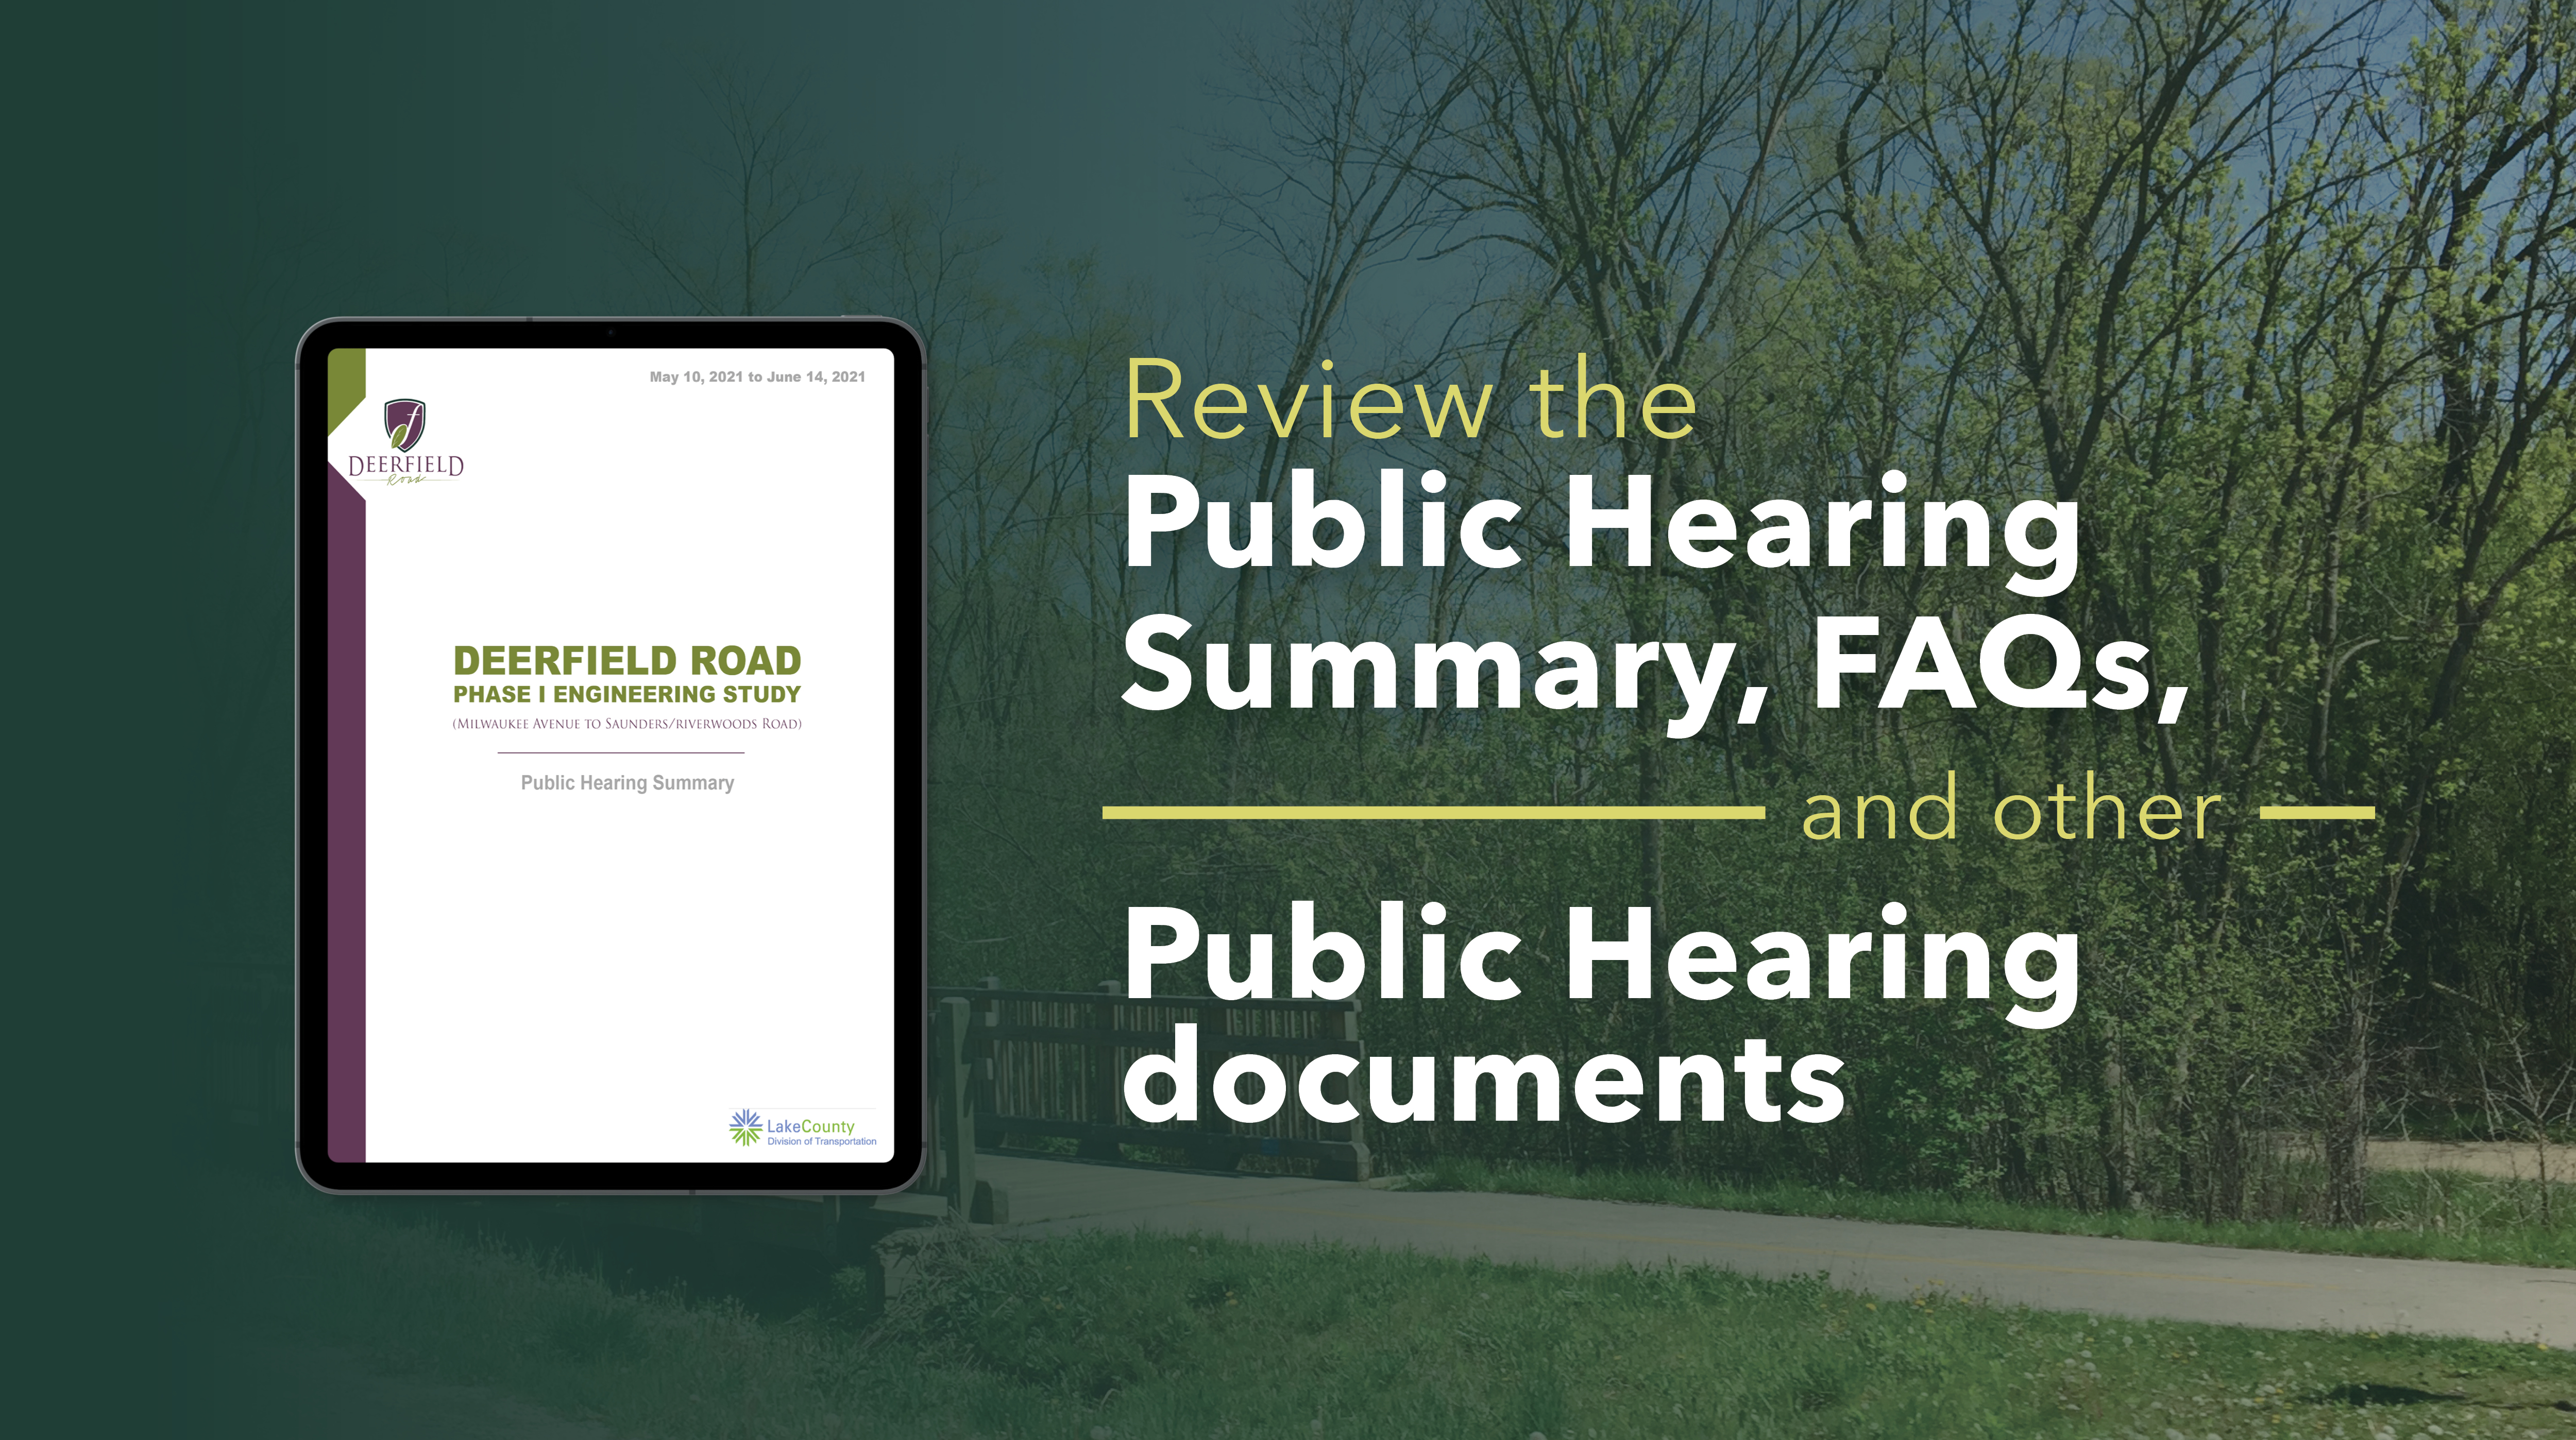 Review the Environmental Assessment and the Public Hearing documents